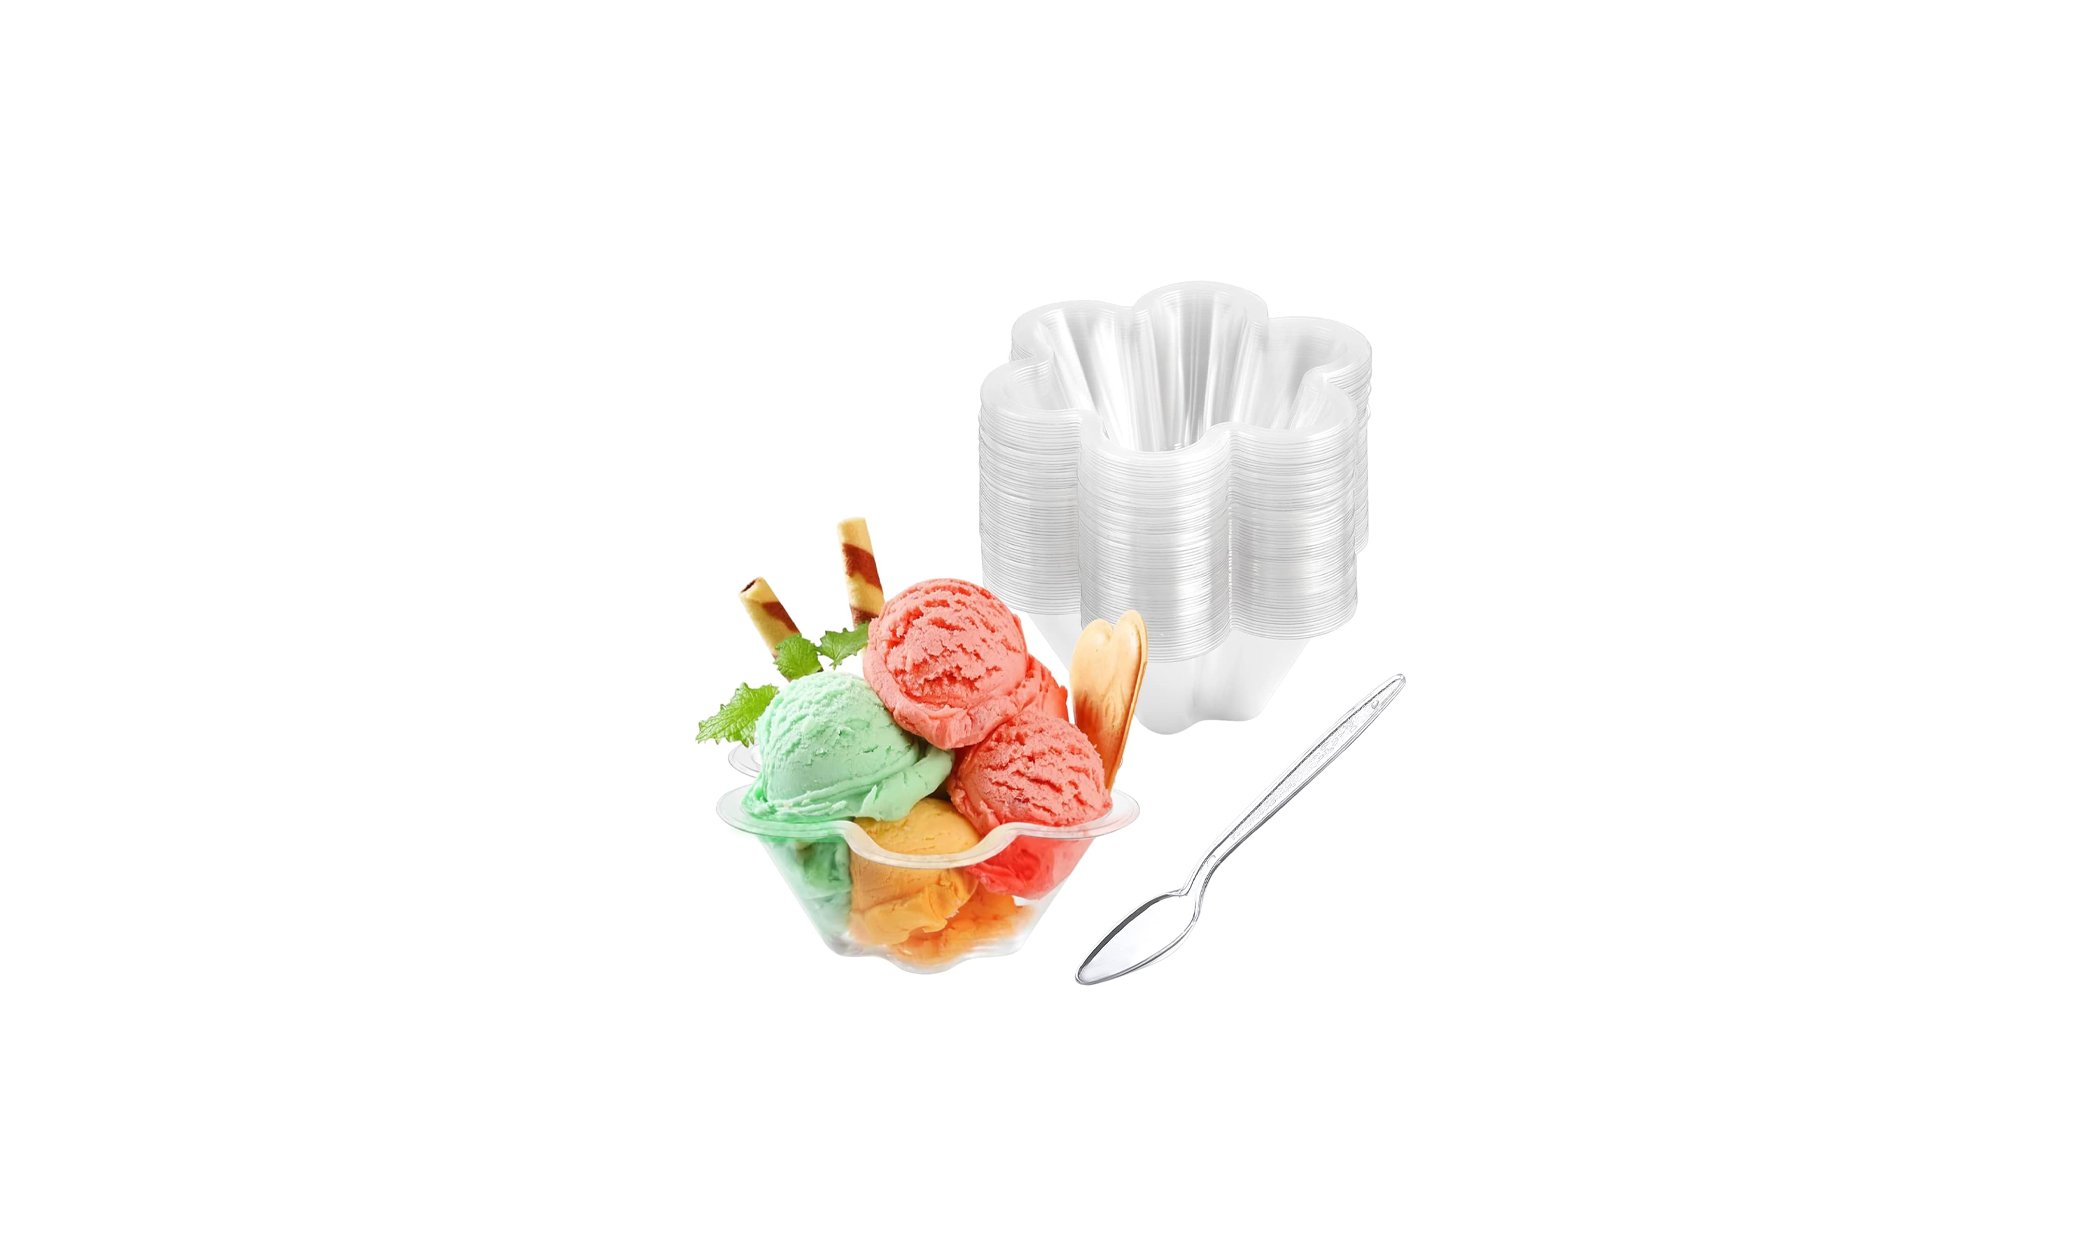 Save 38% on a 50-Pack of Novelty Ice Cream Cups with Spoons!